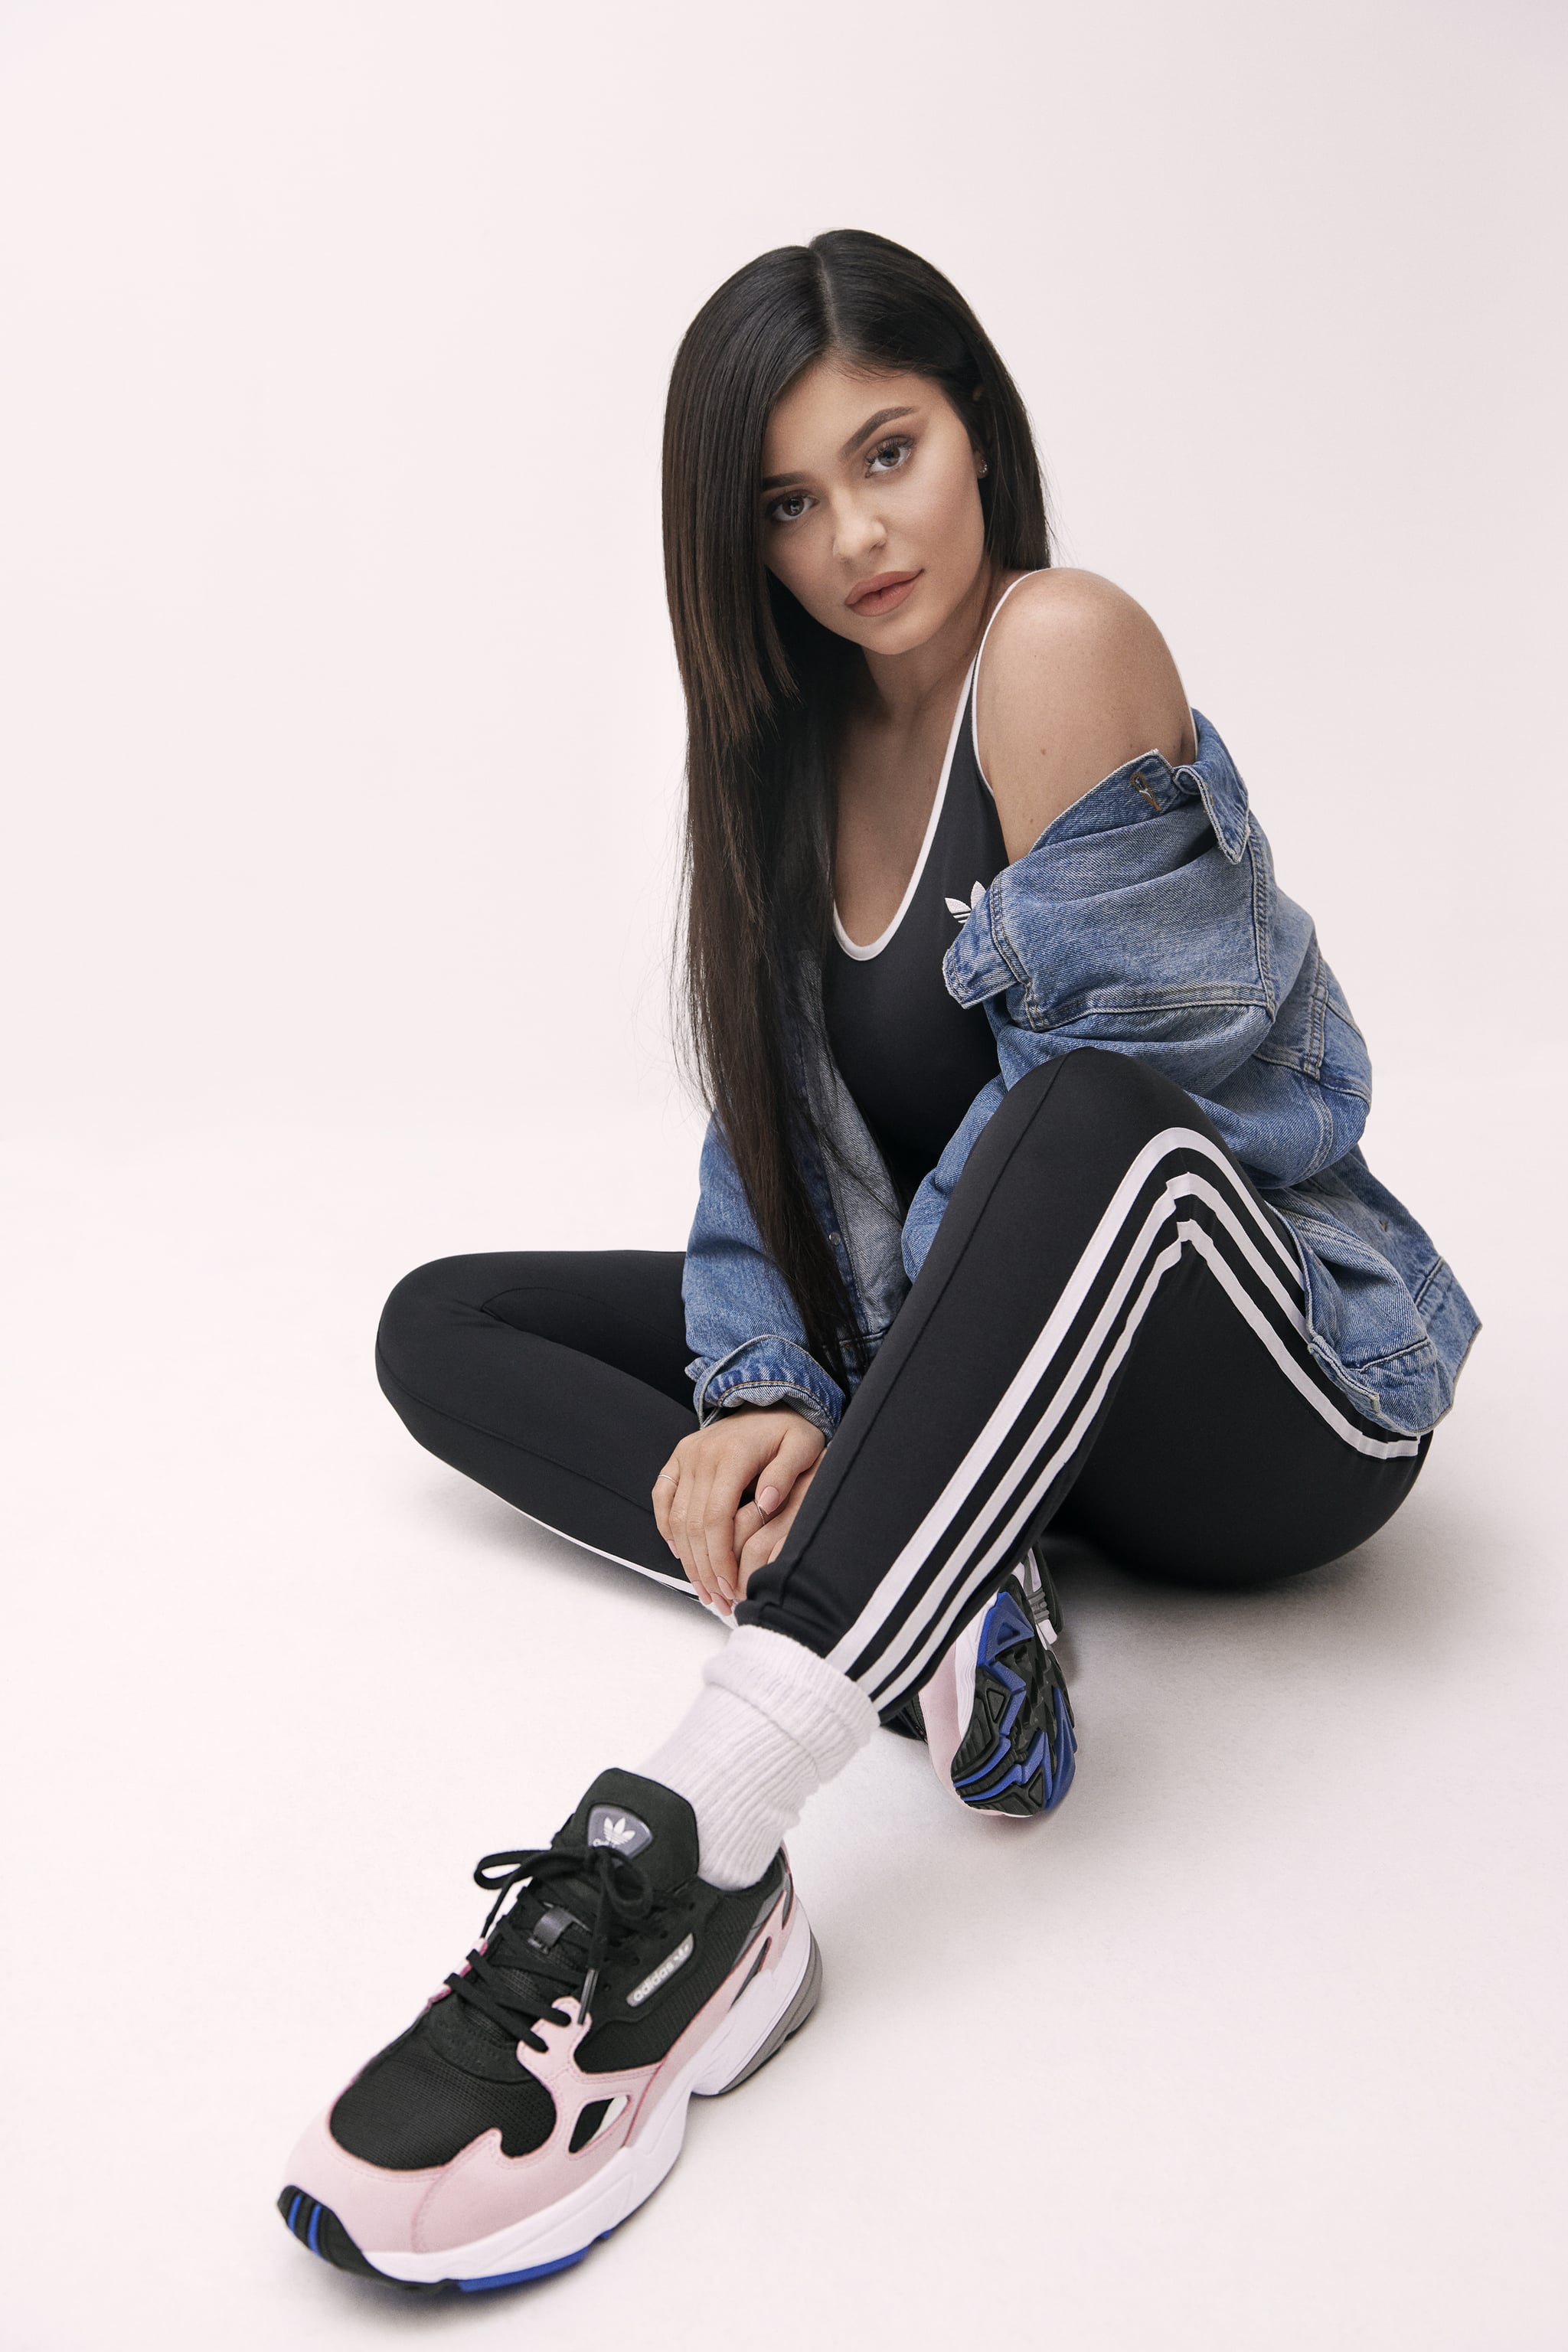 kylie jenner falcon trainers